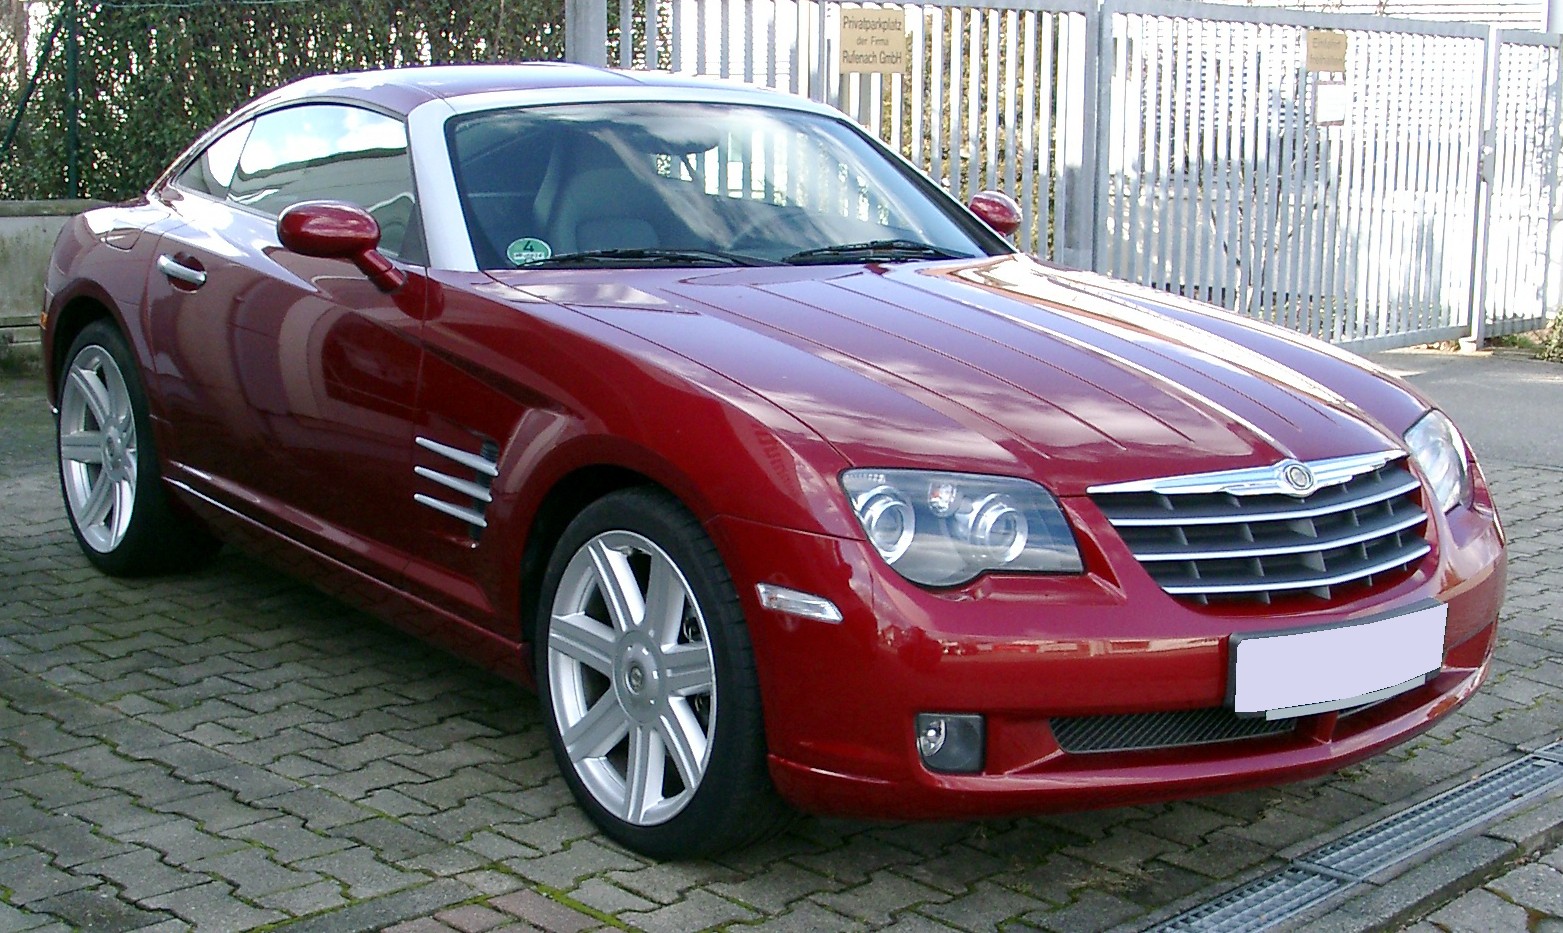 Chrysler Crossfire Pictures Beautiful Cool Cars Wallpaper